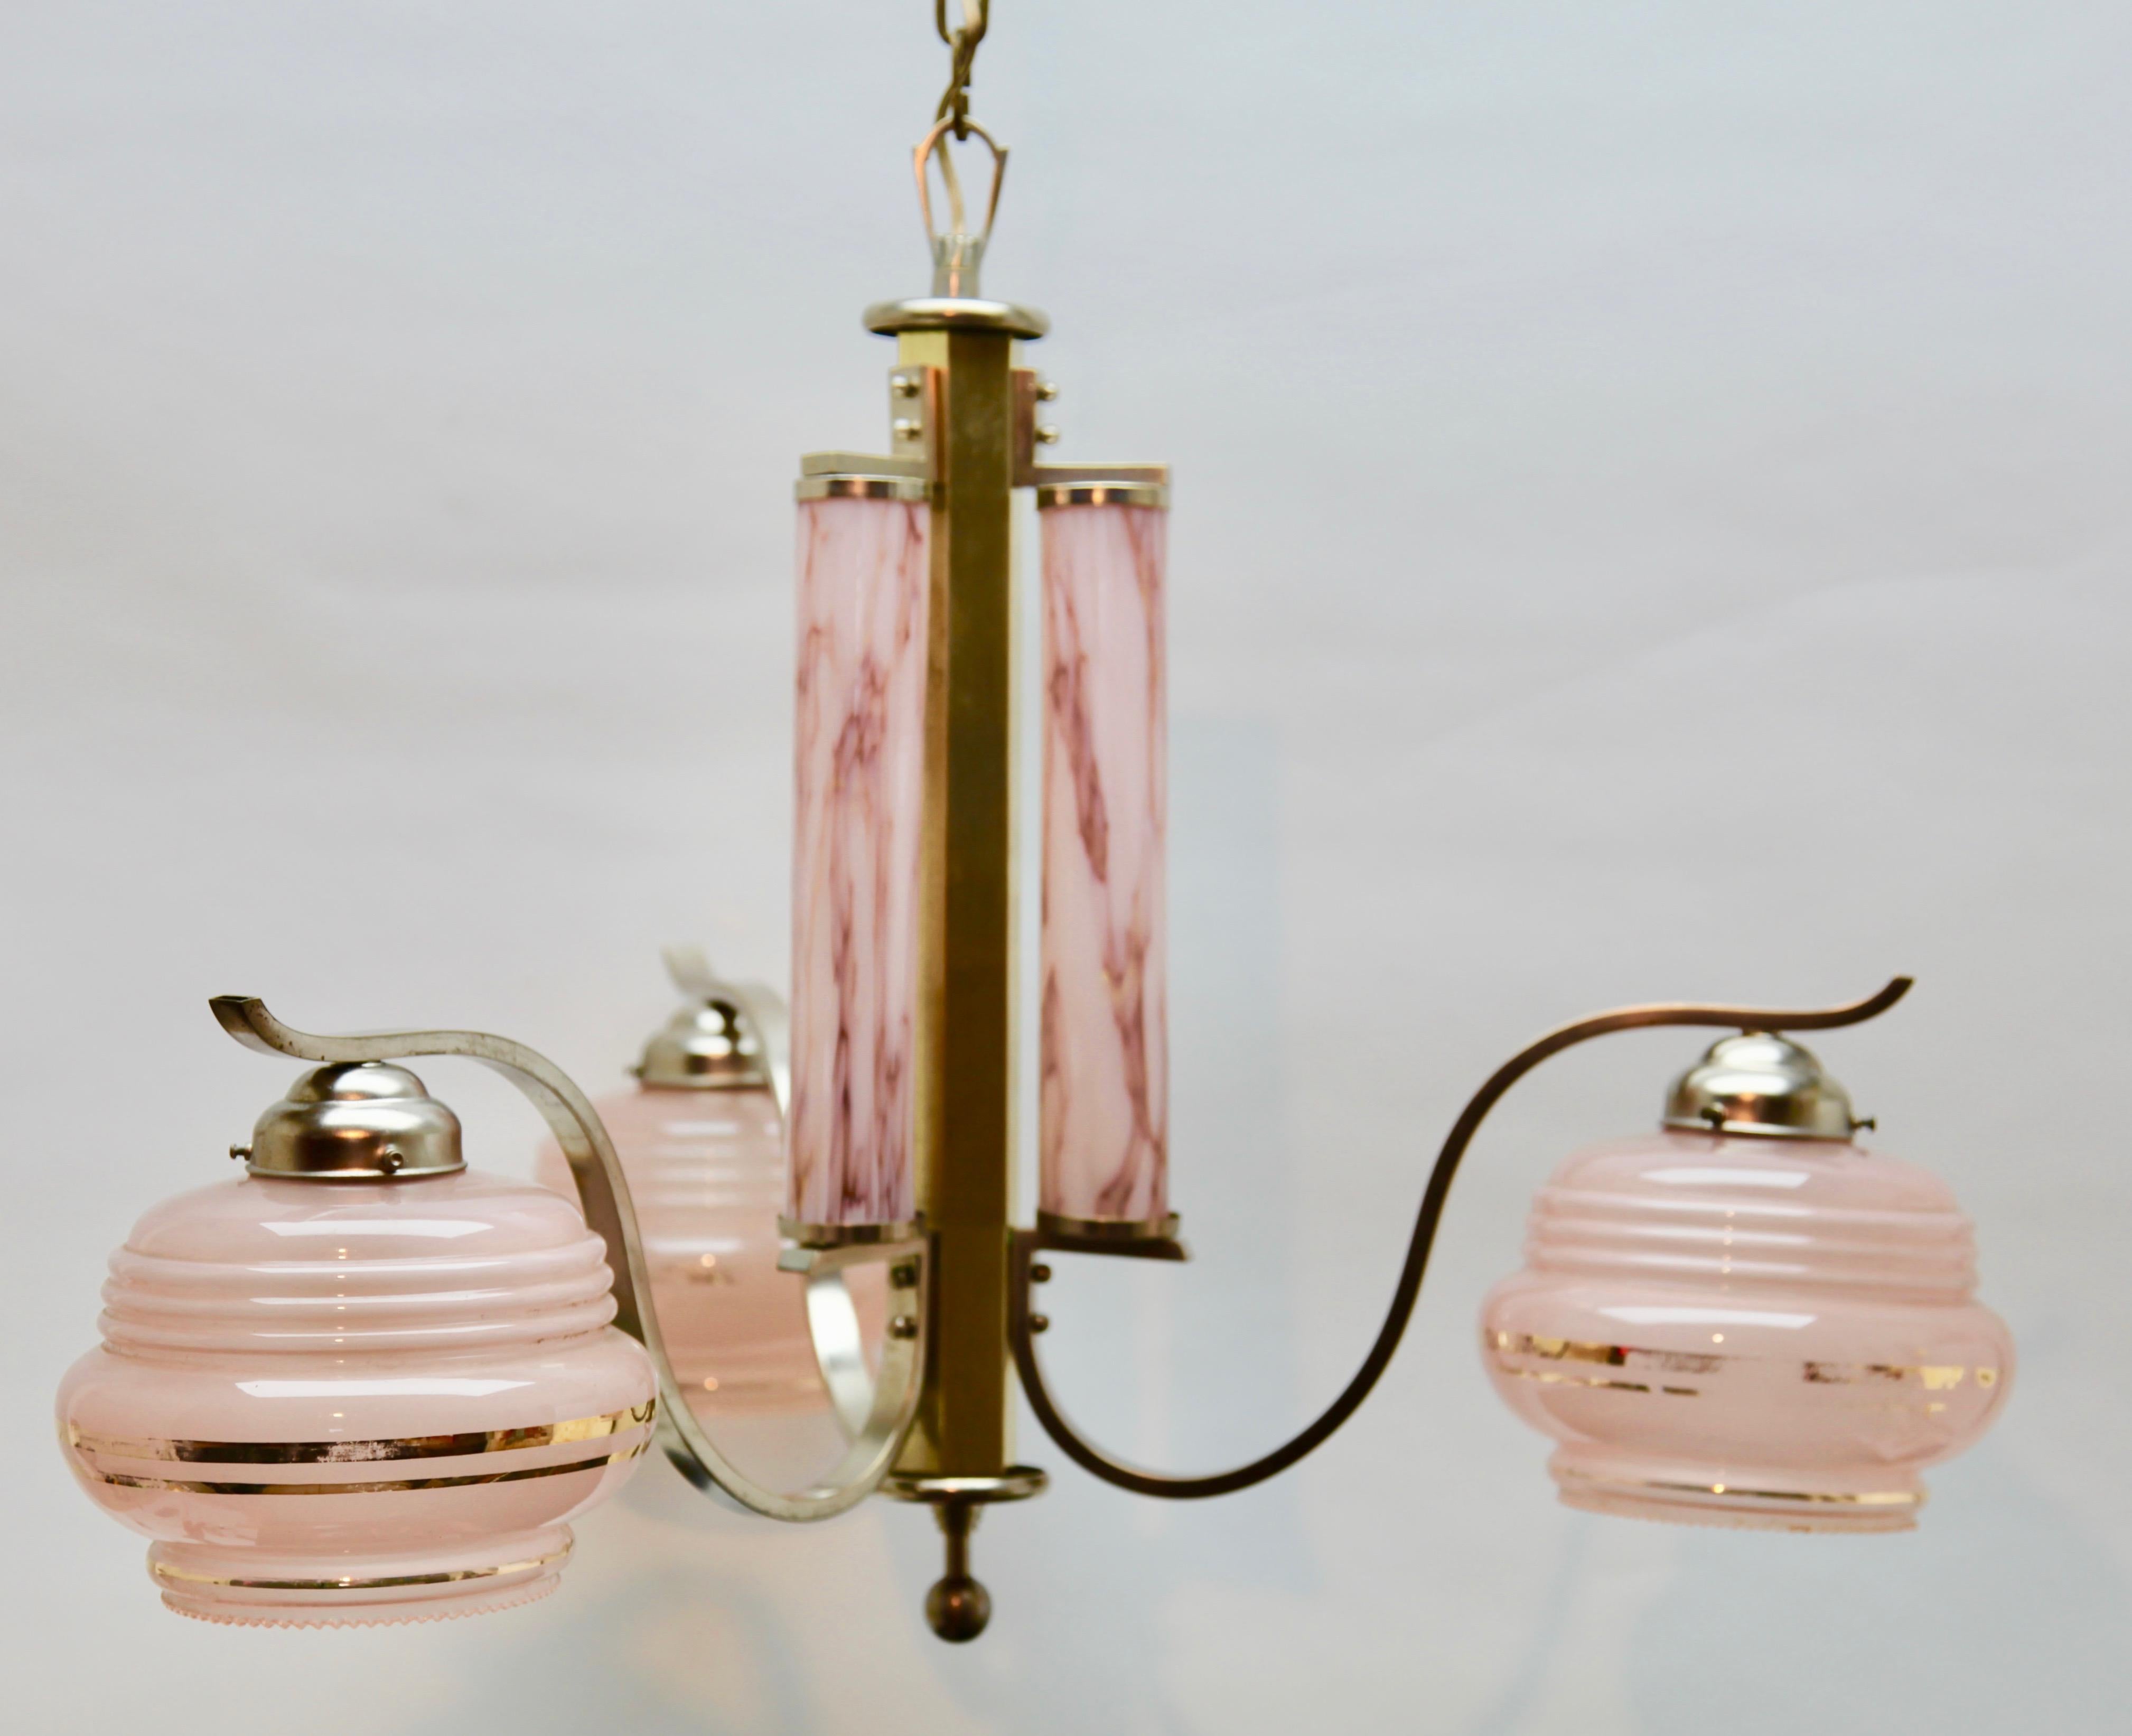 Art Deco chandelier on a fixed rod pendant with three arms and mounts of chromed metal, in the style of Kalmar. Unusual glass lampshades 

As service: We can adjust the lamp height for you in advance if needed.

In good condition and in full